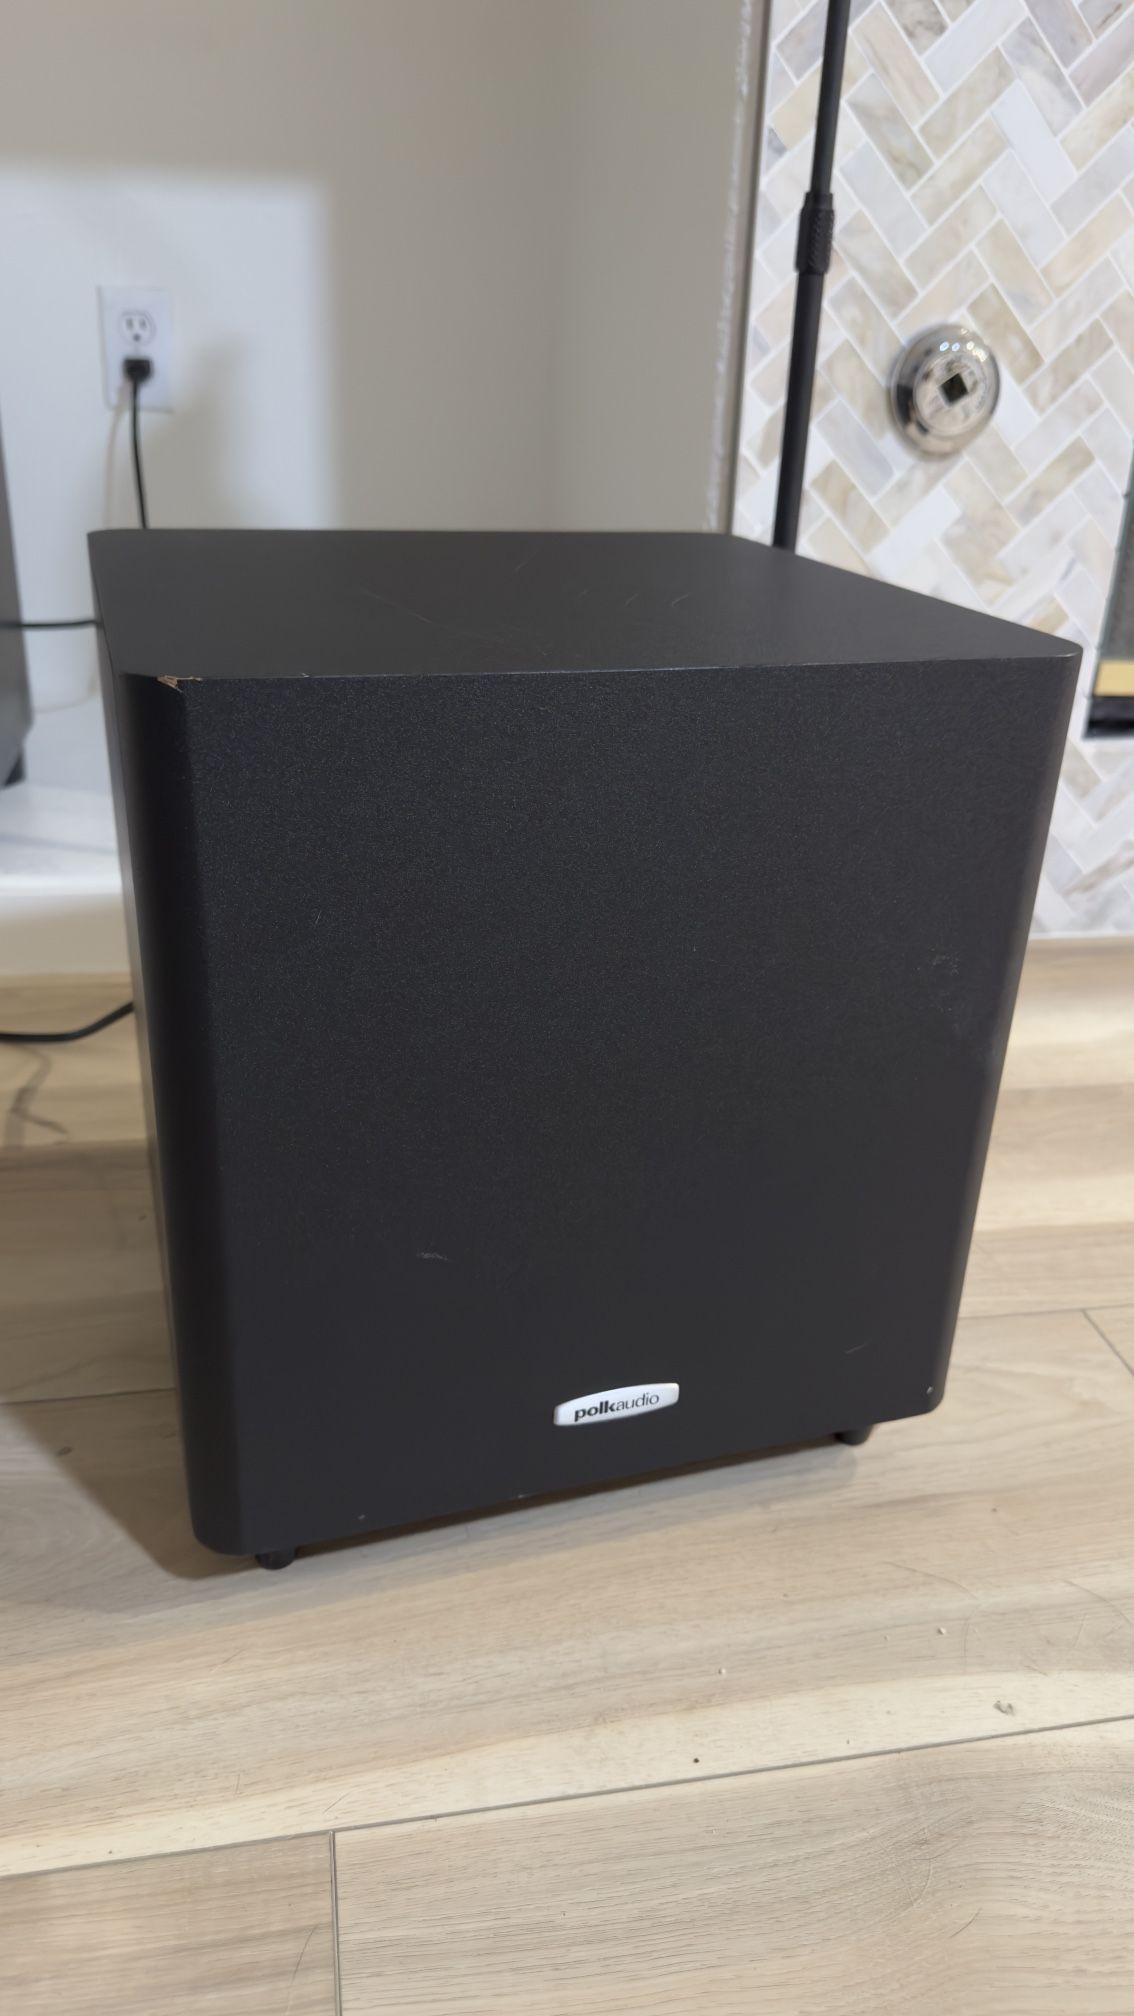 Polk Audio TL1600 Powered Subwoofer - Tested & Working